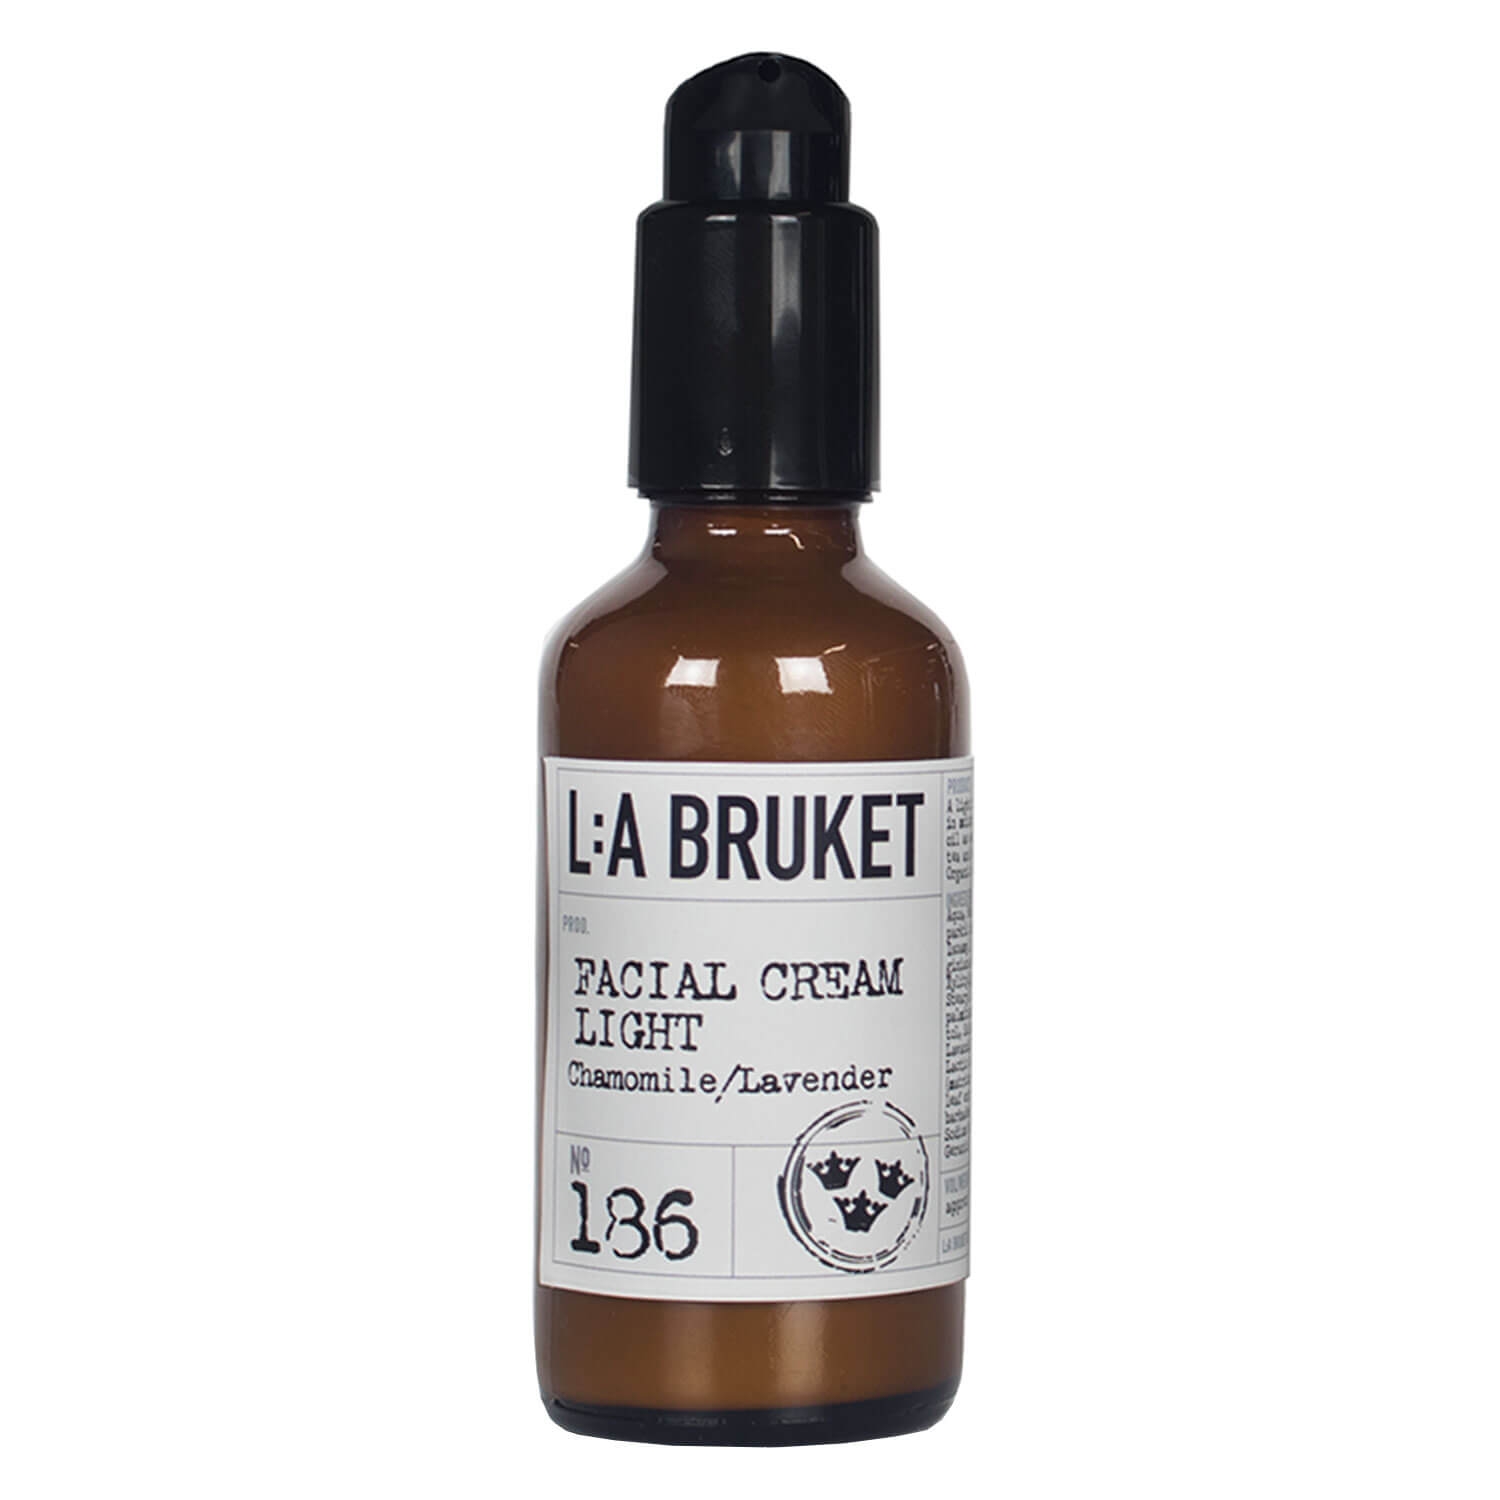 Product image from L:A Bruket - No.186 Facial Cream Light Chamomile/Lavender